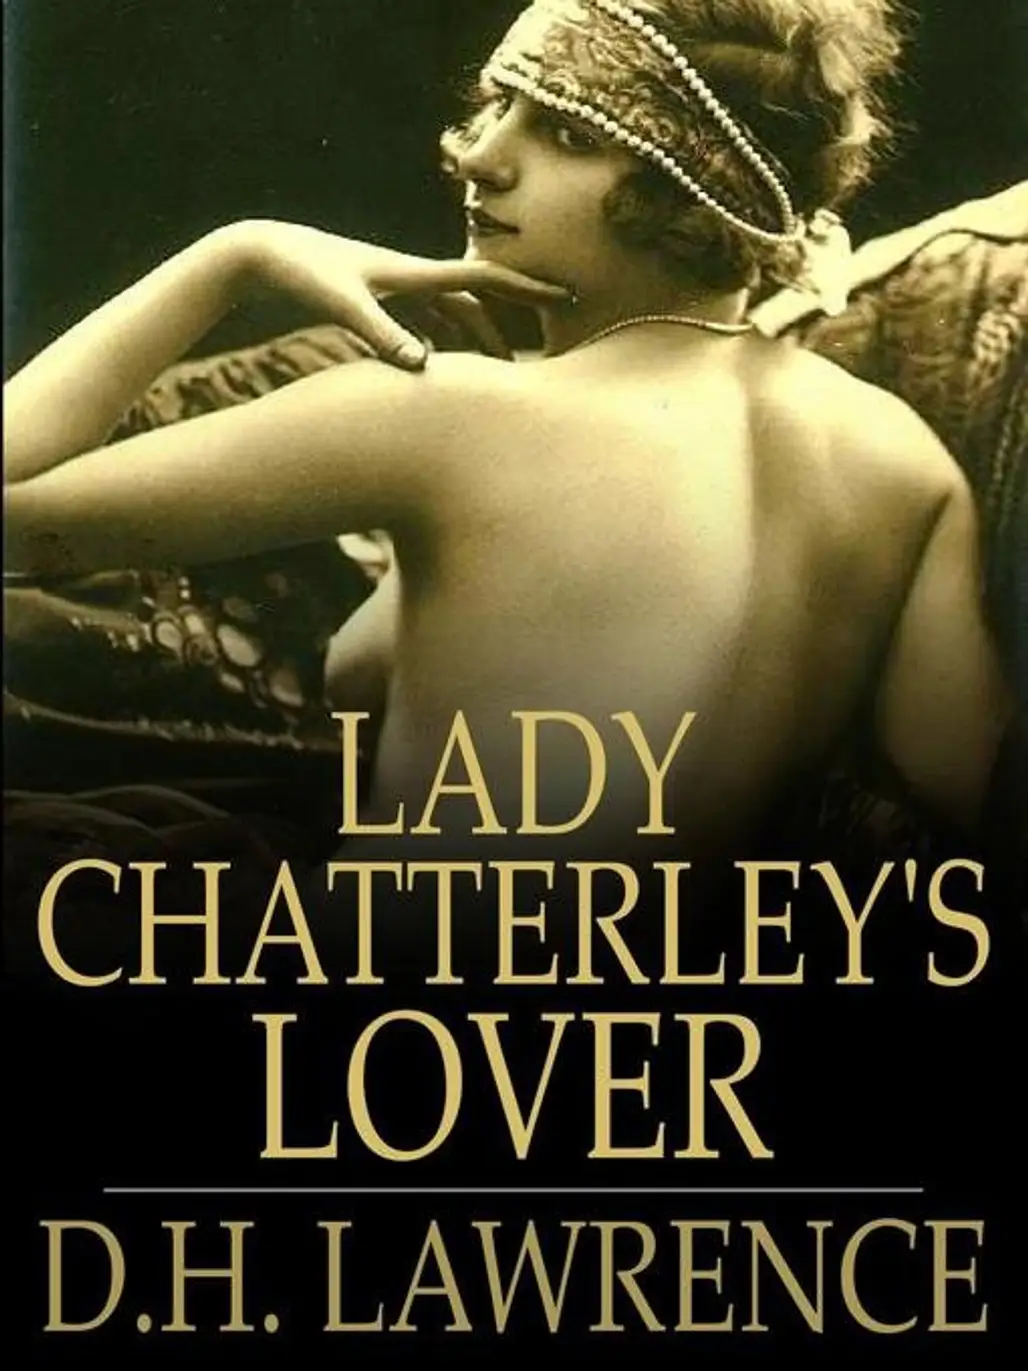 Lady Chatterley’s Lover by D.H. Lawrence